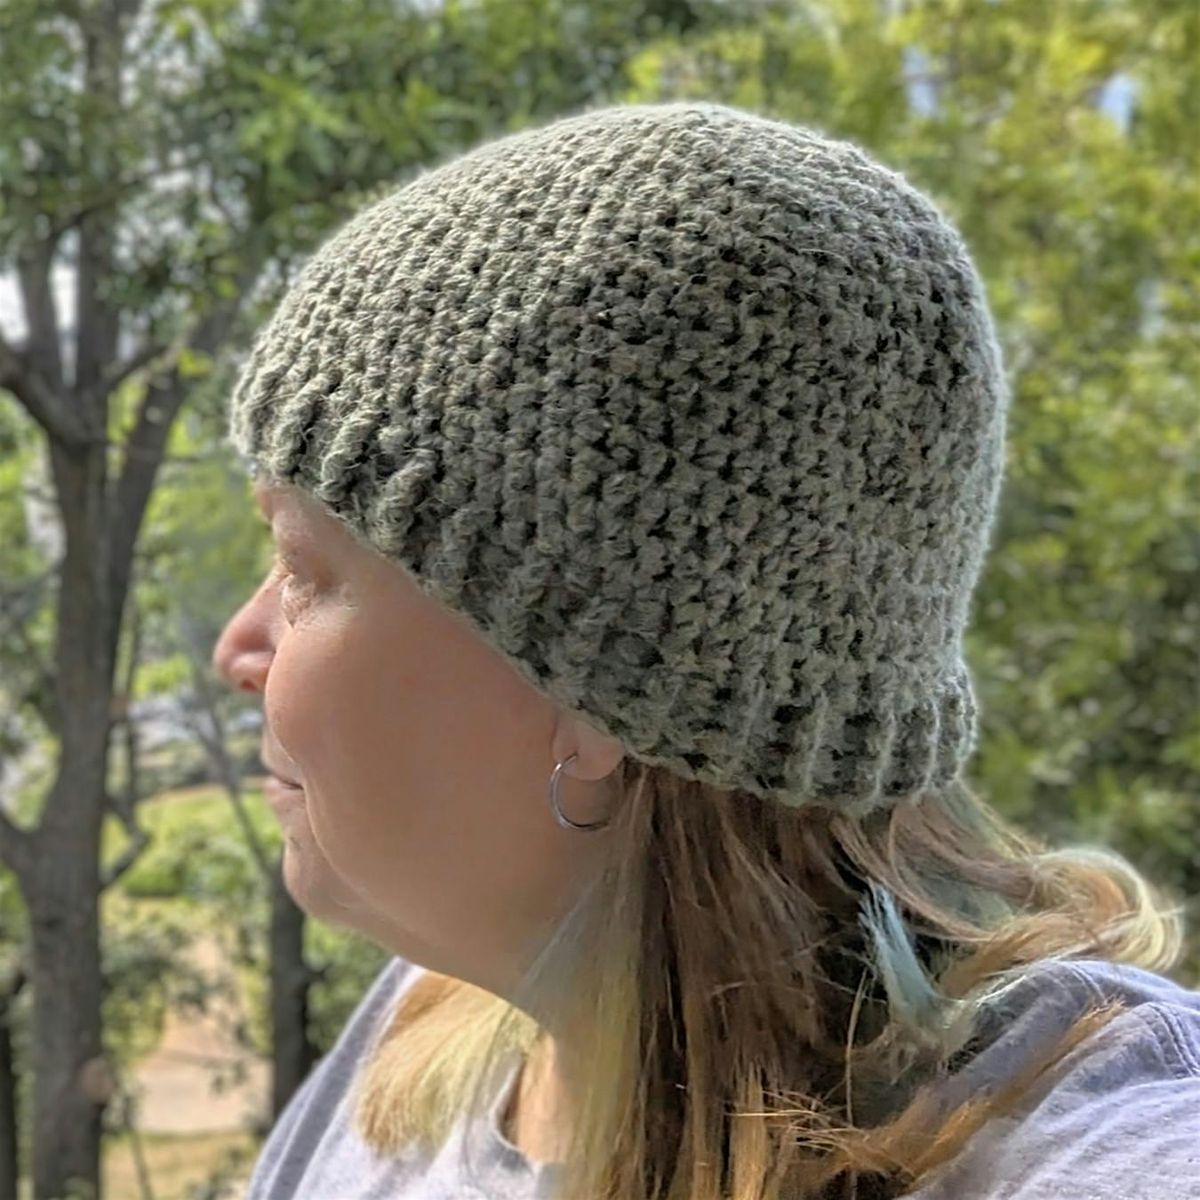 First Crochet Hat: "Just-Like-That Hat" (Two 2-hour Classes)